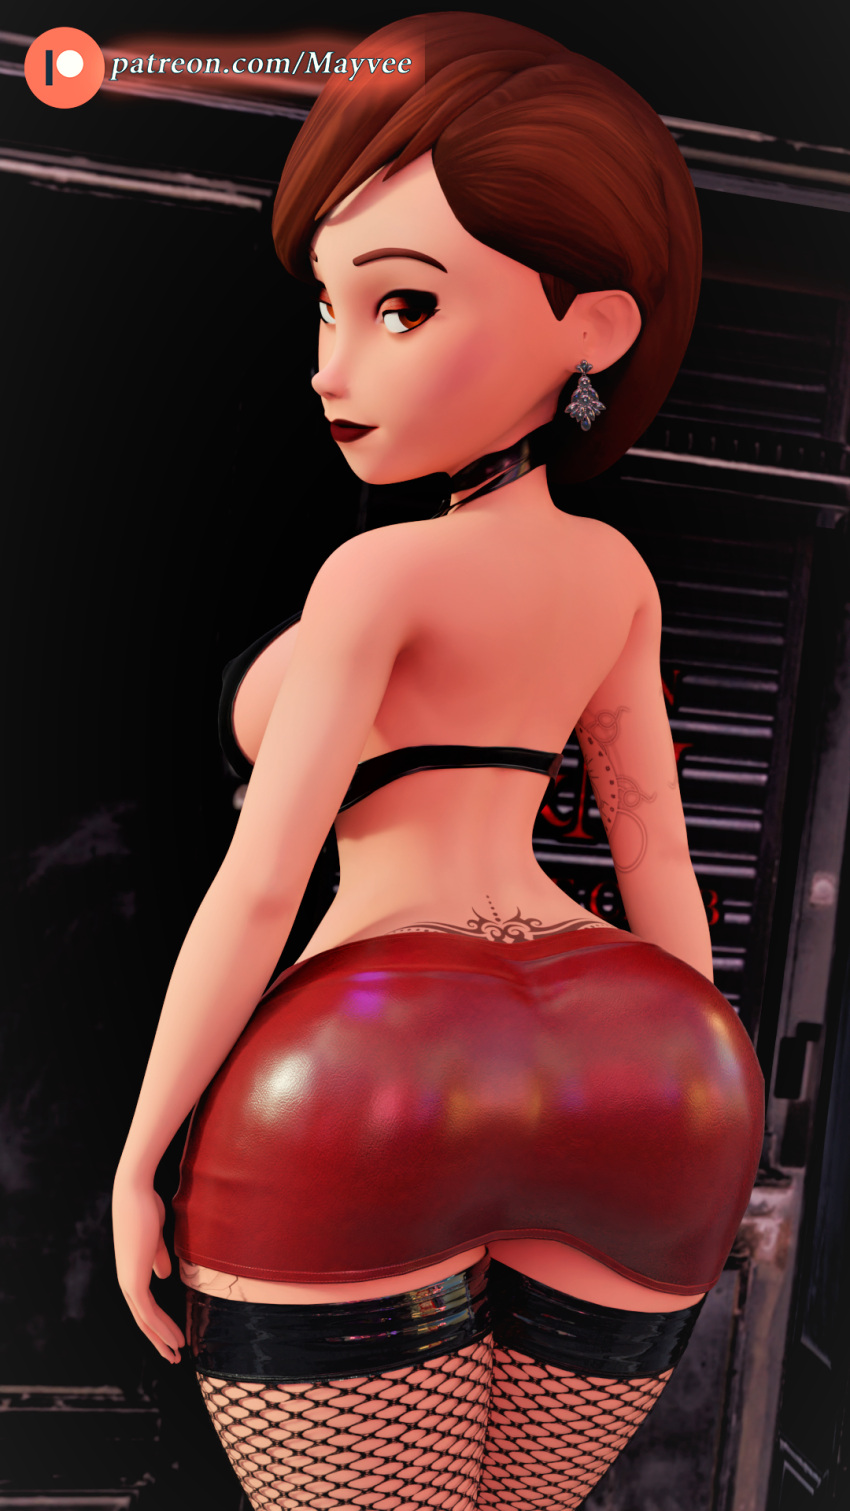 ass ass_focus helen_parr horny horny_women leather_skirt makeup mature_female mayvee milf slutty_outfit stockings the_incredibles thighs